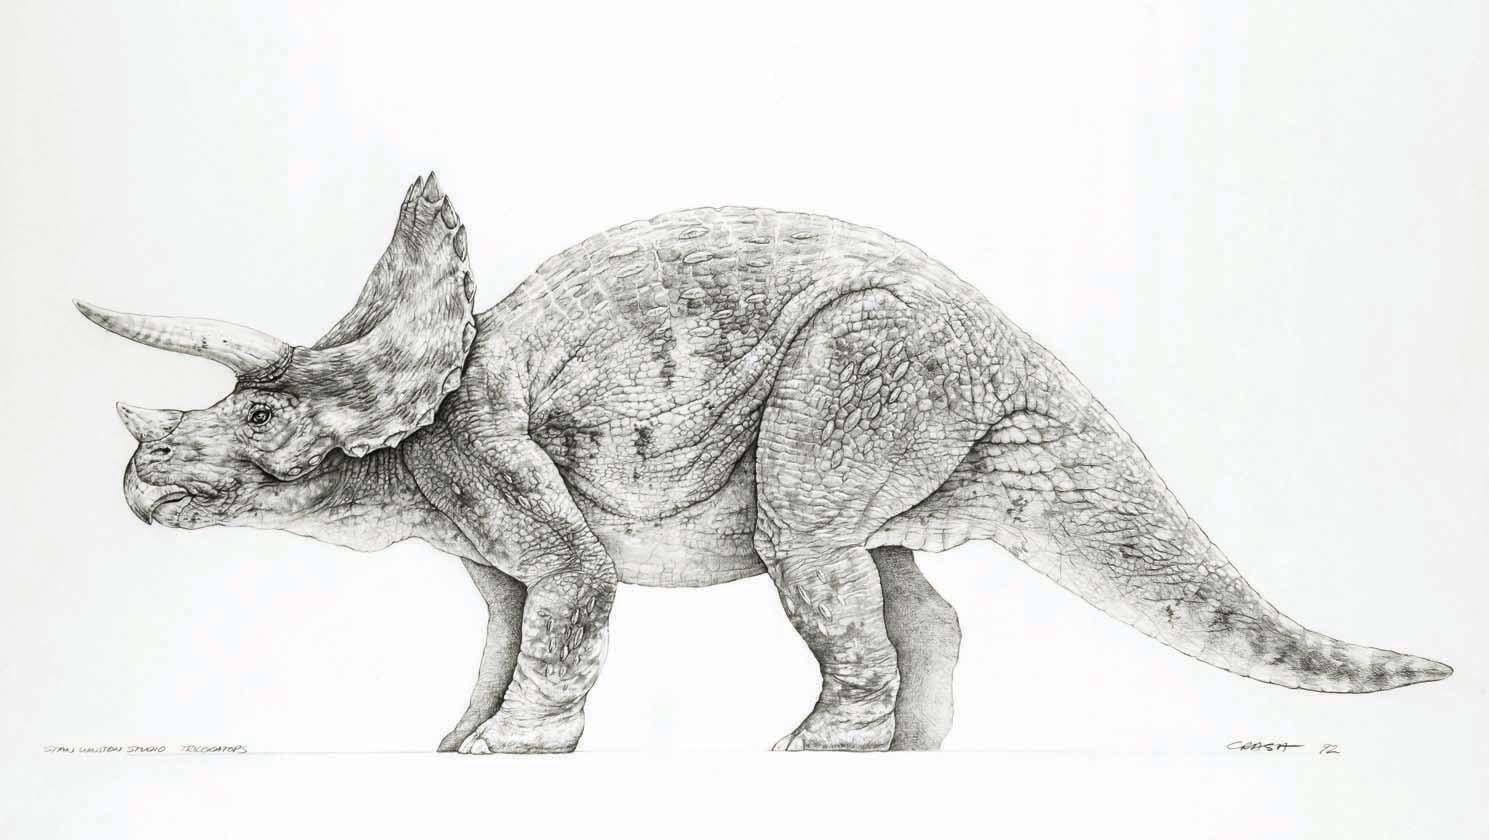 Image Triceratops Concept Art Jurassic Park Wiki Fandom Powered By Wikia 